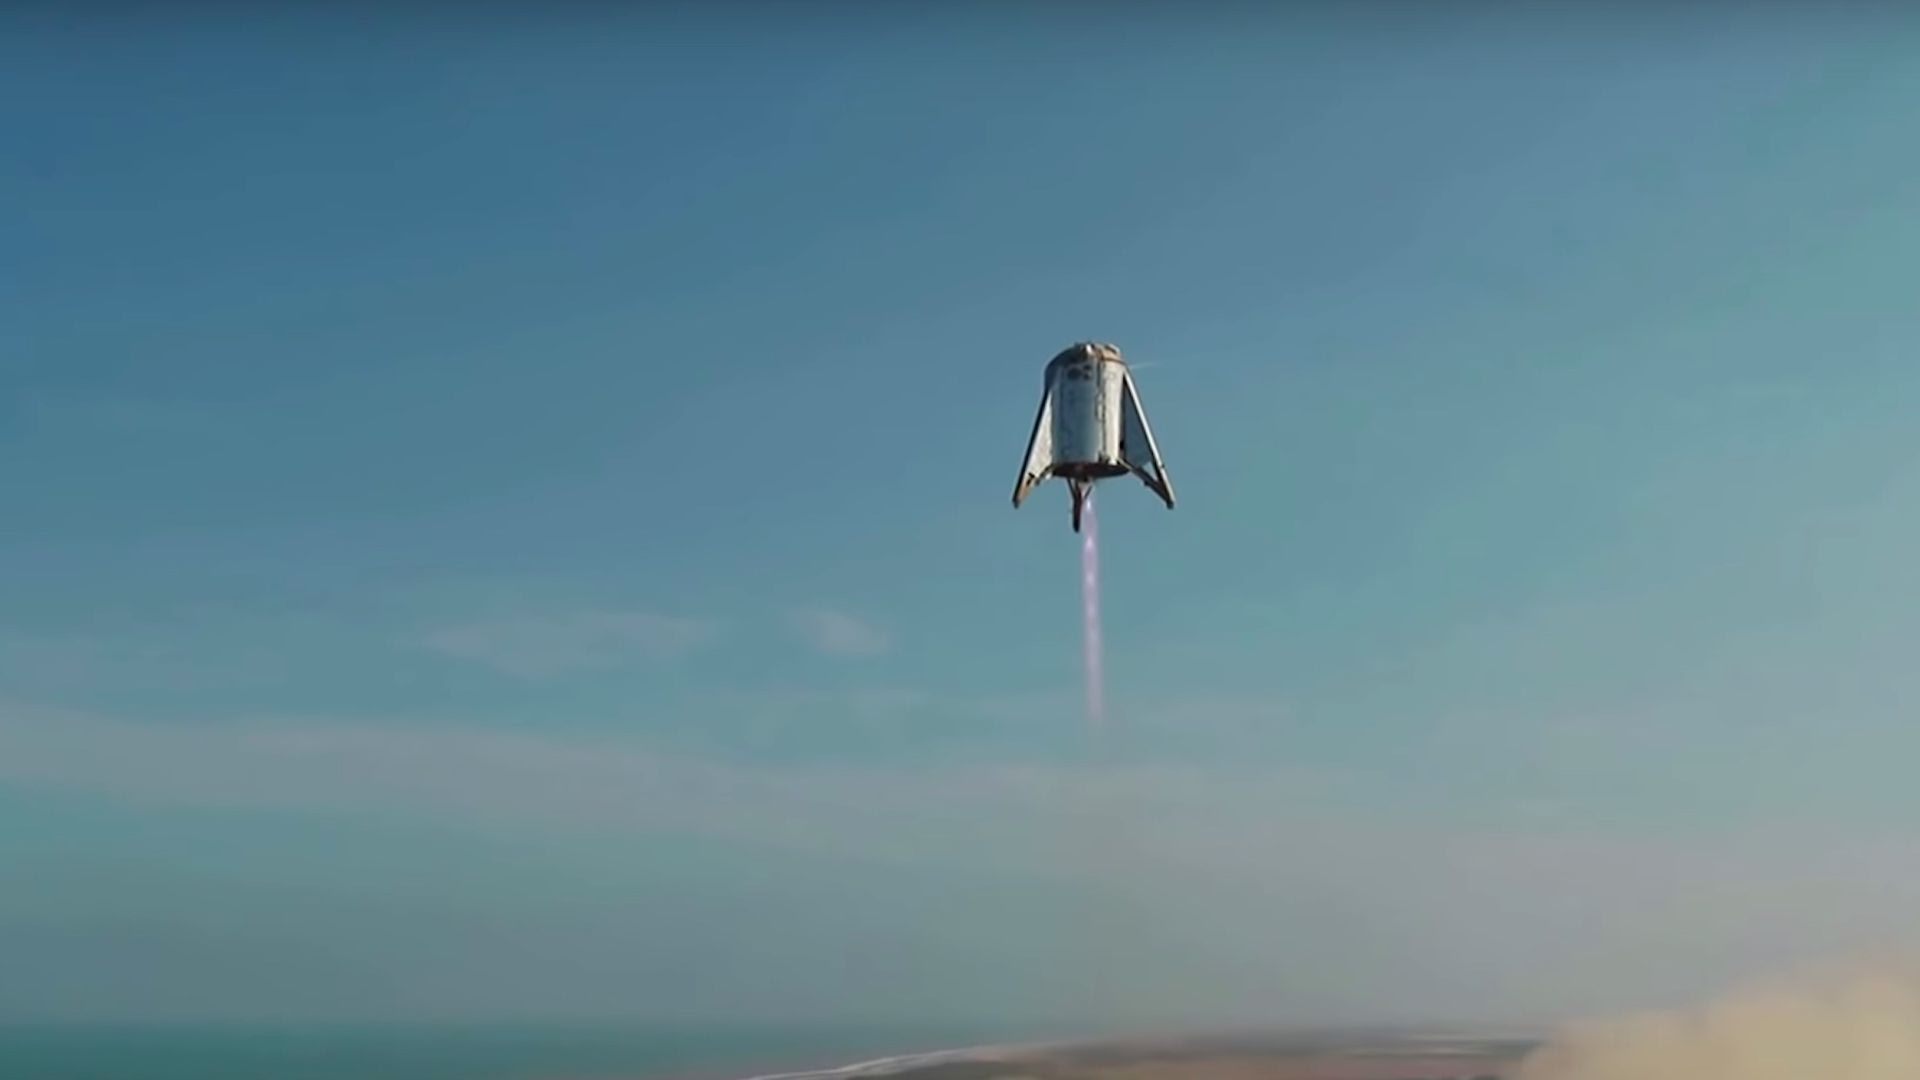 Starhopper flying through the sky above Texas. Photo: SpaceX